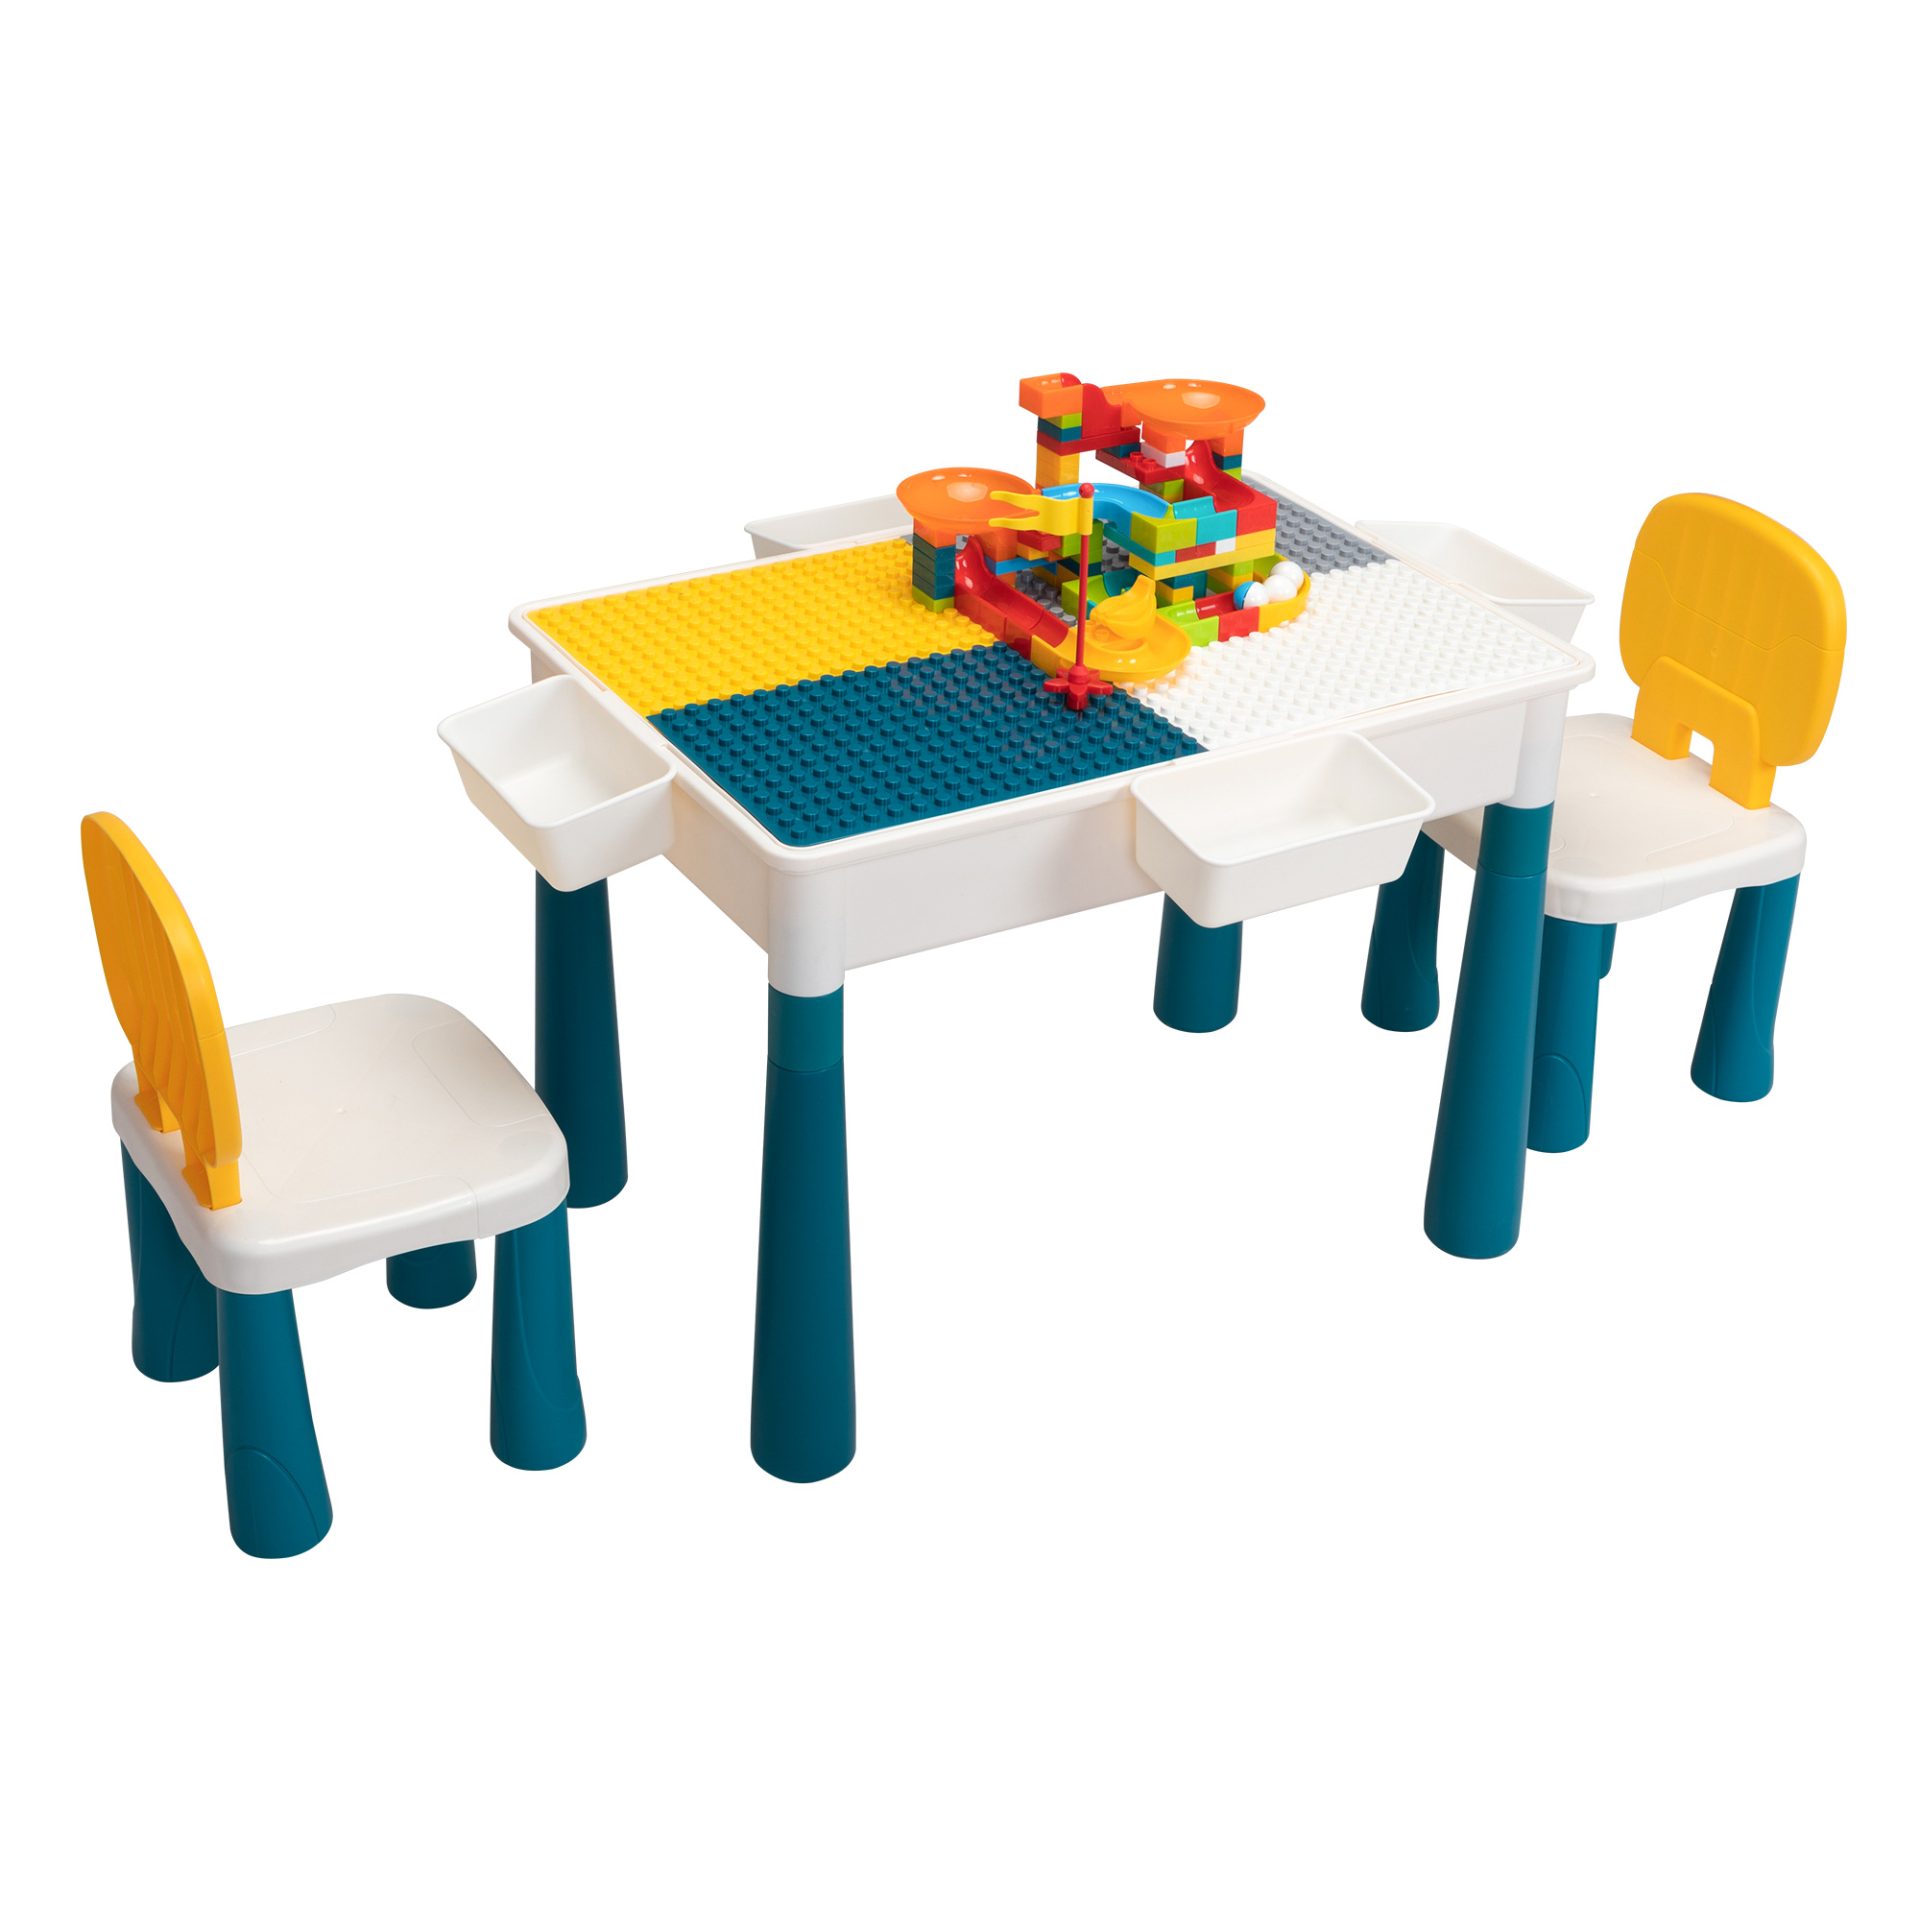 Nyeekoy Kids Activity Table and Chair Set w/ Large Size Blocks, 2 Chairs, Writing Table, Sand Table, for Kids Over 3 Years Old, Gray+Green TH17N0706 2